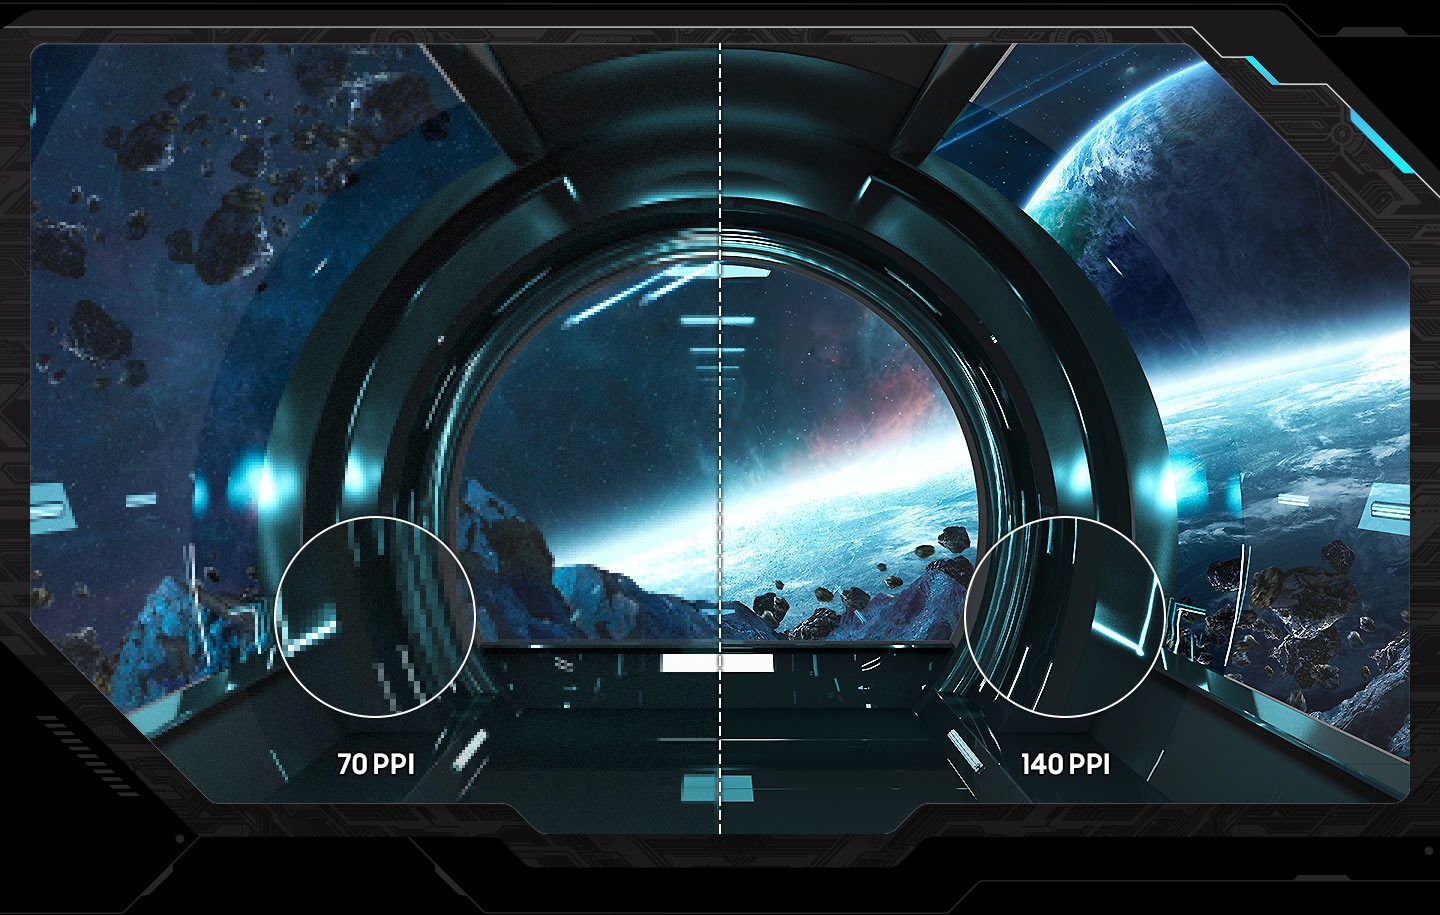 A single monitor is divided into two sections on its screen. Across both sections, a spaceship is flying through a group of asteroids, in orbit of a nearby planet, with one planet in the background. The left side of the screen is pixelated, with a circle zooming into a further pixelated section labeled "70 PPI." The right side of the screen is clearly rendered, with a circle zoomed into a crisp section of the image labeled "140 PPI."